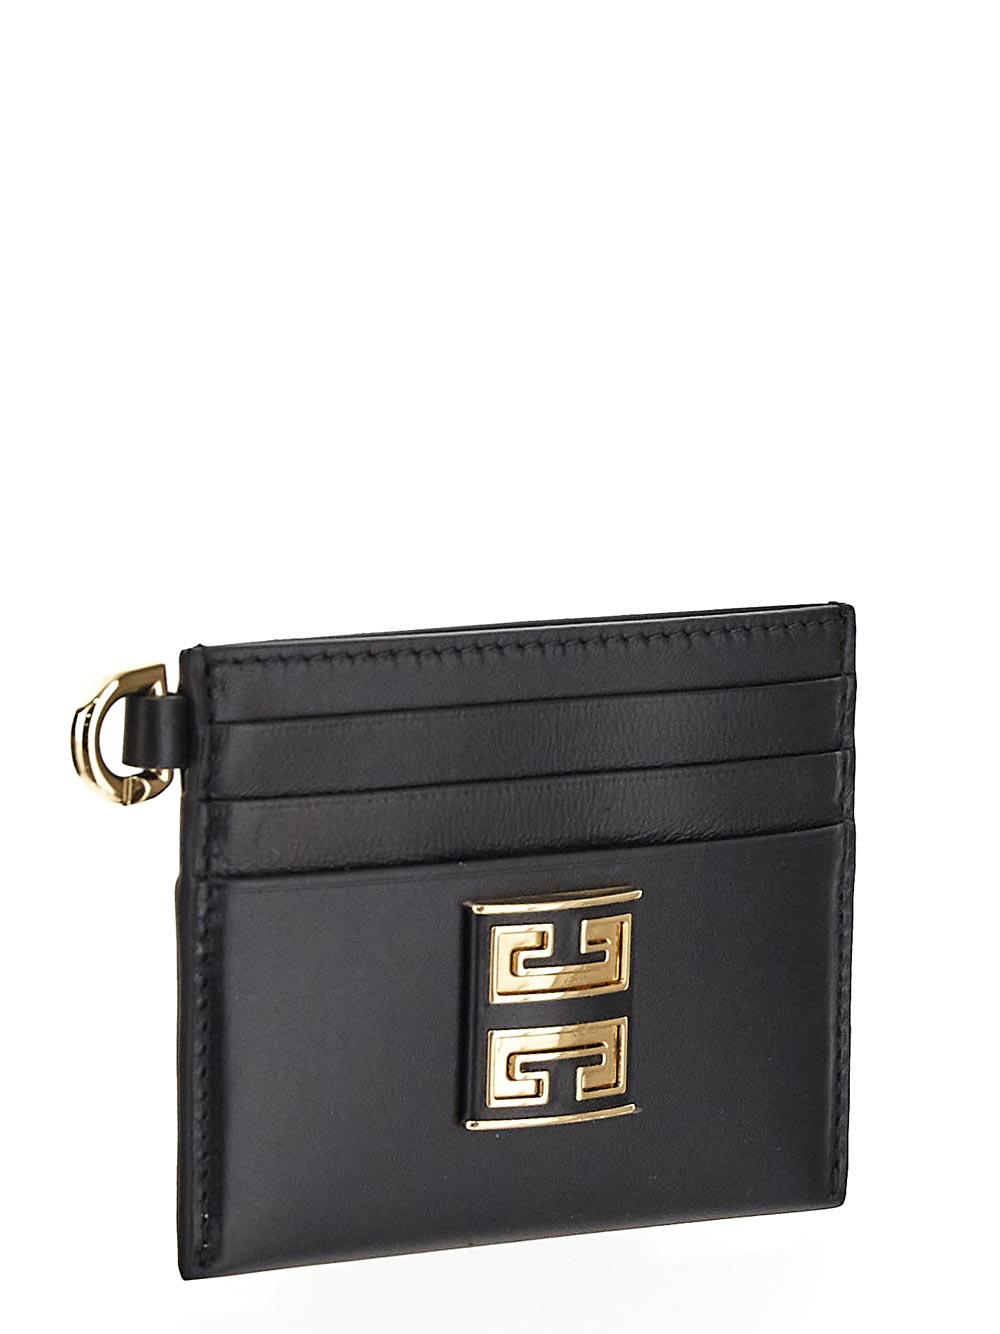 Givenchy 4G Card Holder In Leather